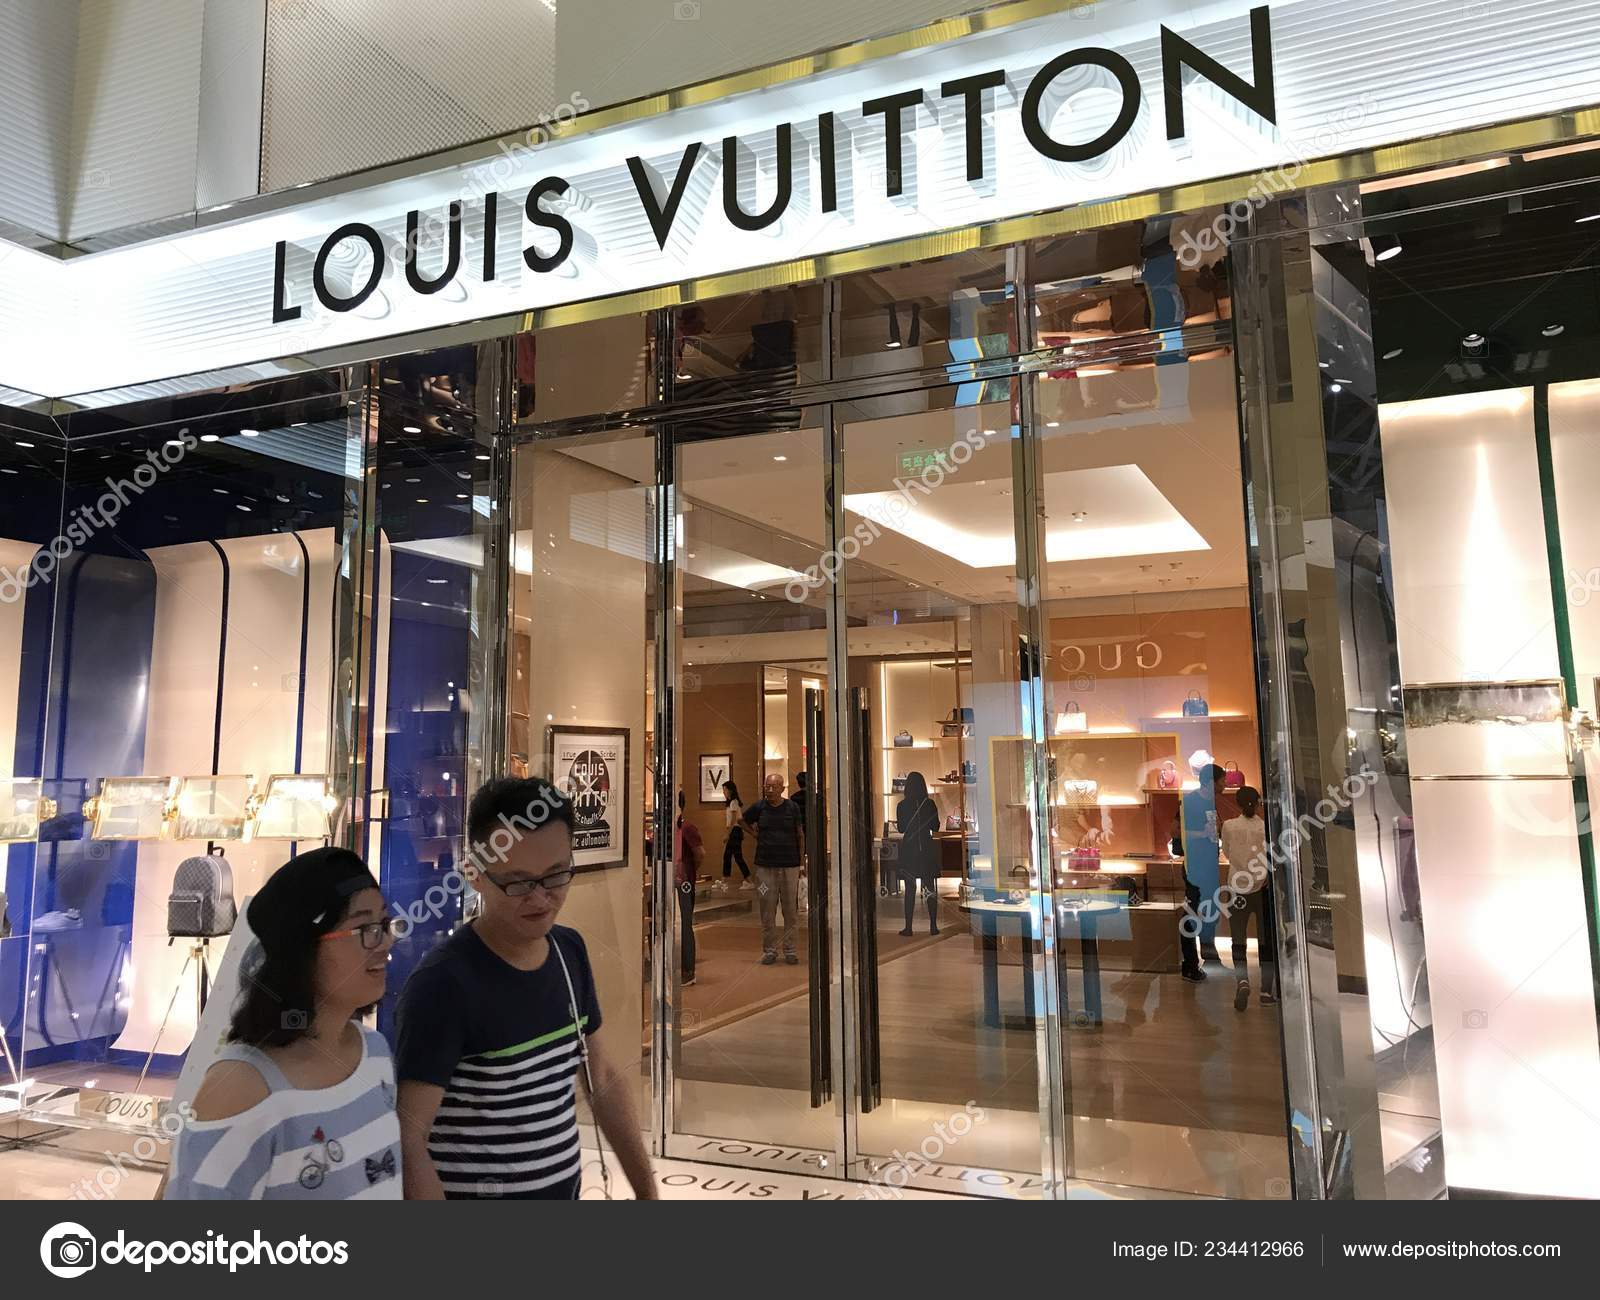 File photo dated September 5, 2012 of Louis Vuitton (LVMH) logo in